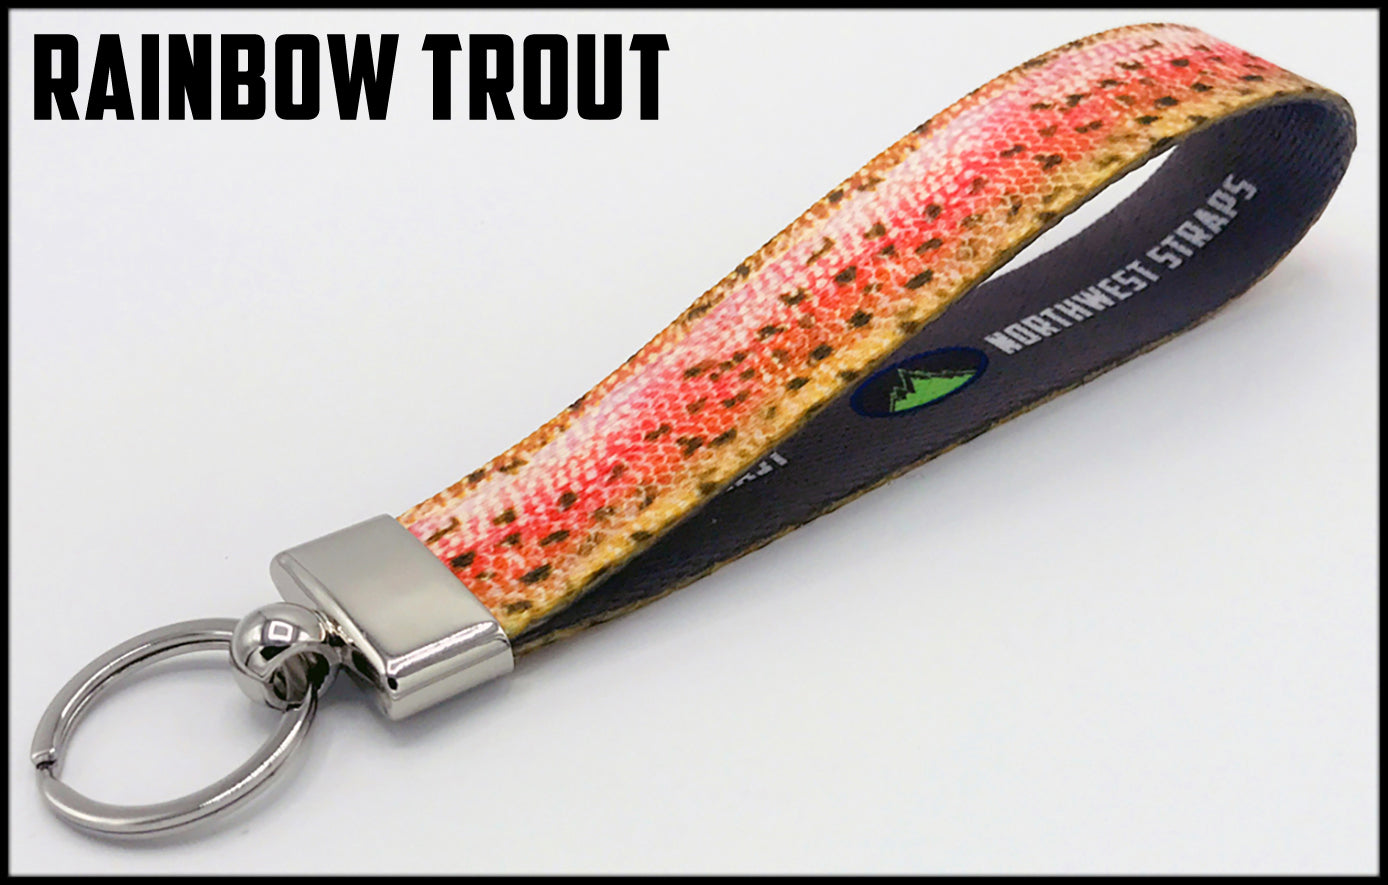 Rainbow trout fish scales and skin. 1 inch custom picture quality polyester webbing keyfob. Design by Northwest Straps.